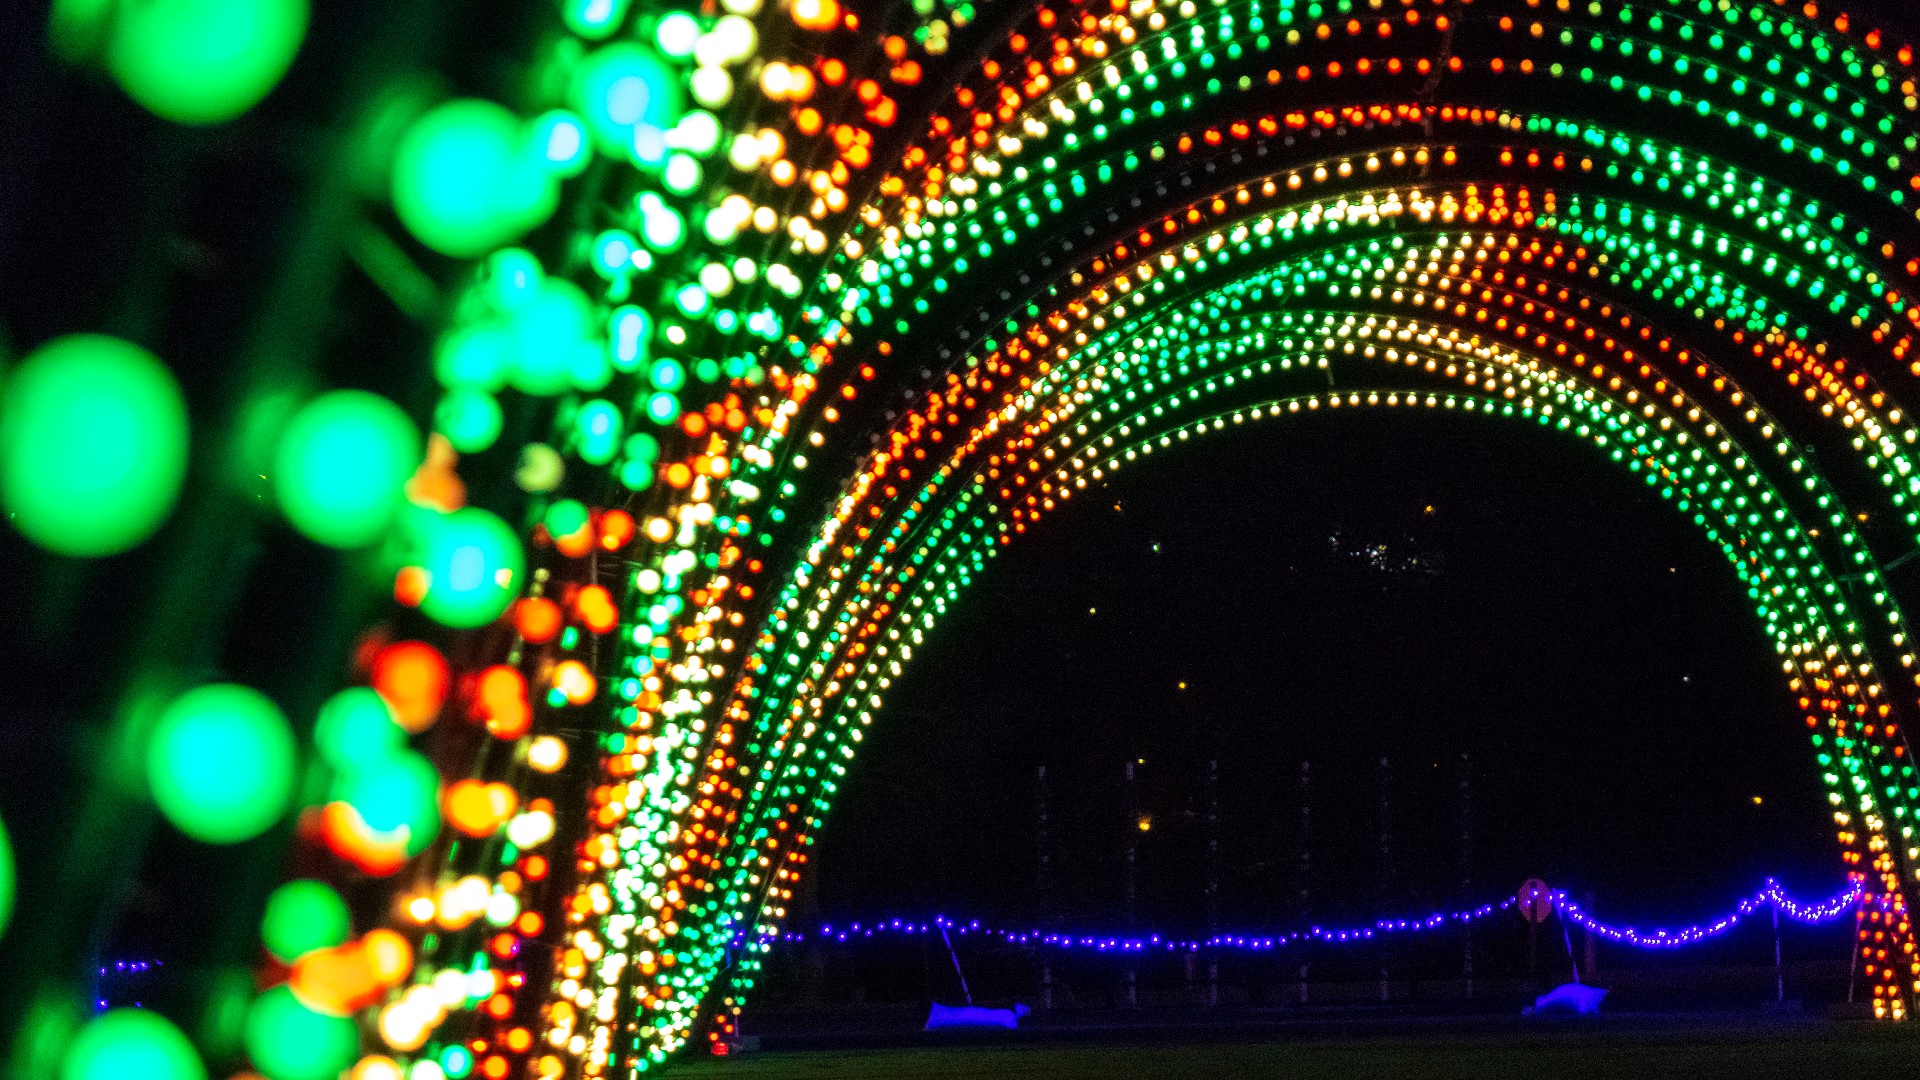 This mile-long, drive-through light display in Federal Heights features 1.5 million LED lights synchronized to Christmas music.